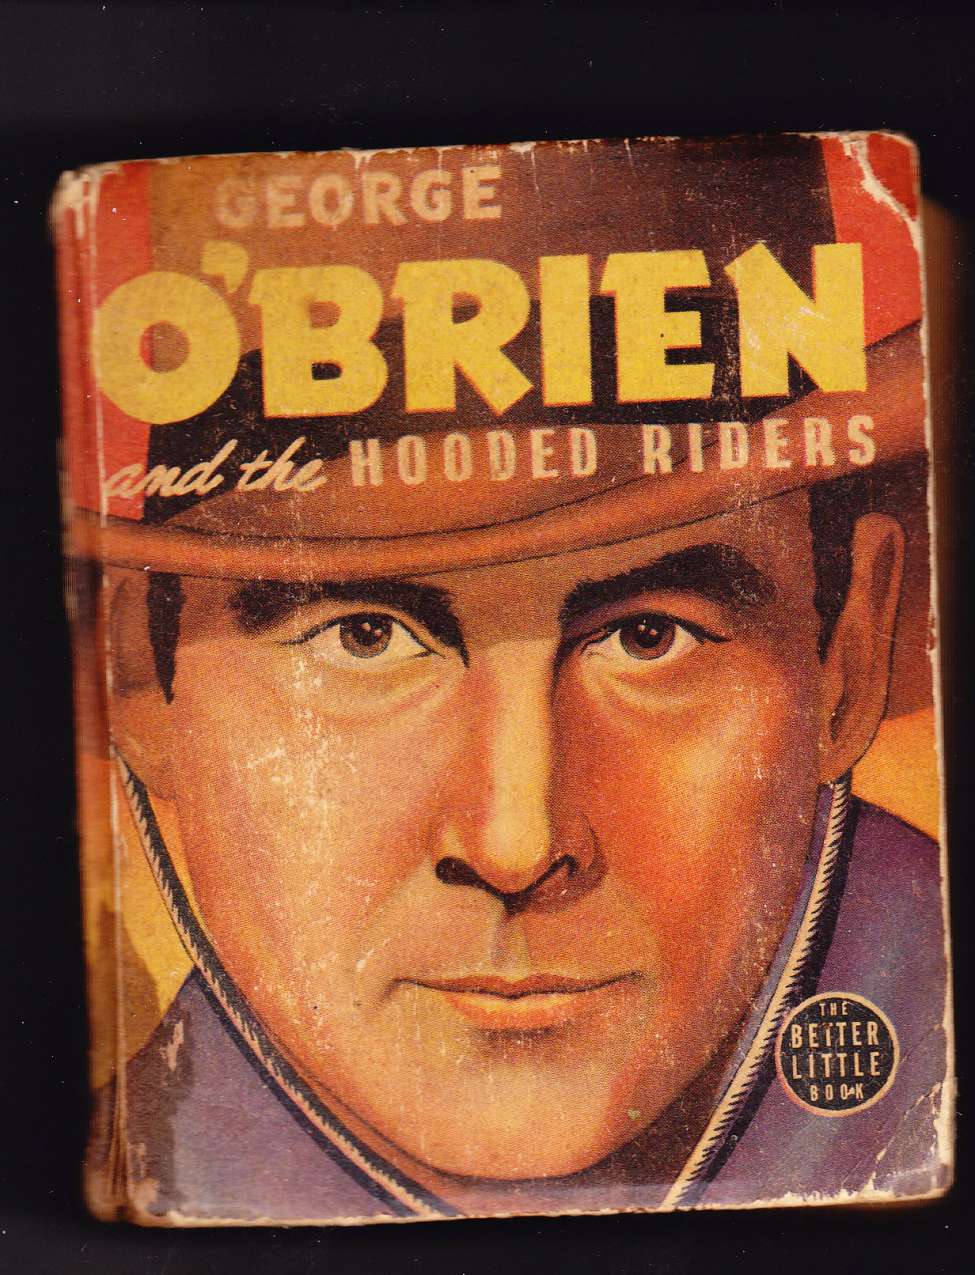 Comic Book Cover For George O'Brien and the Hooded Riders